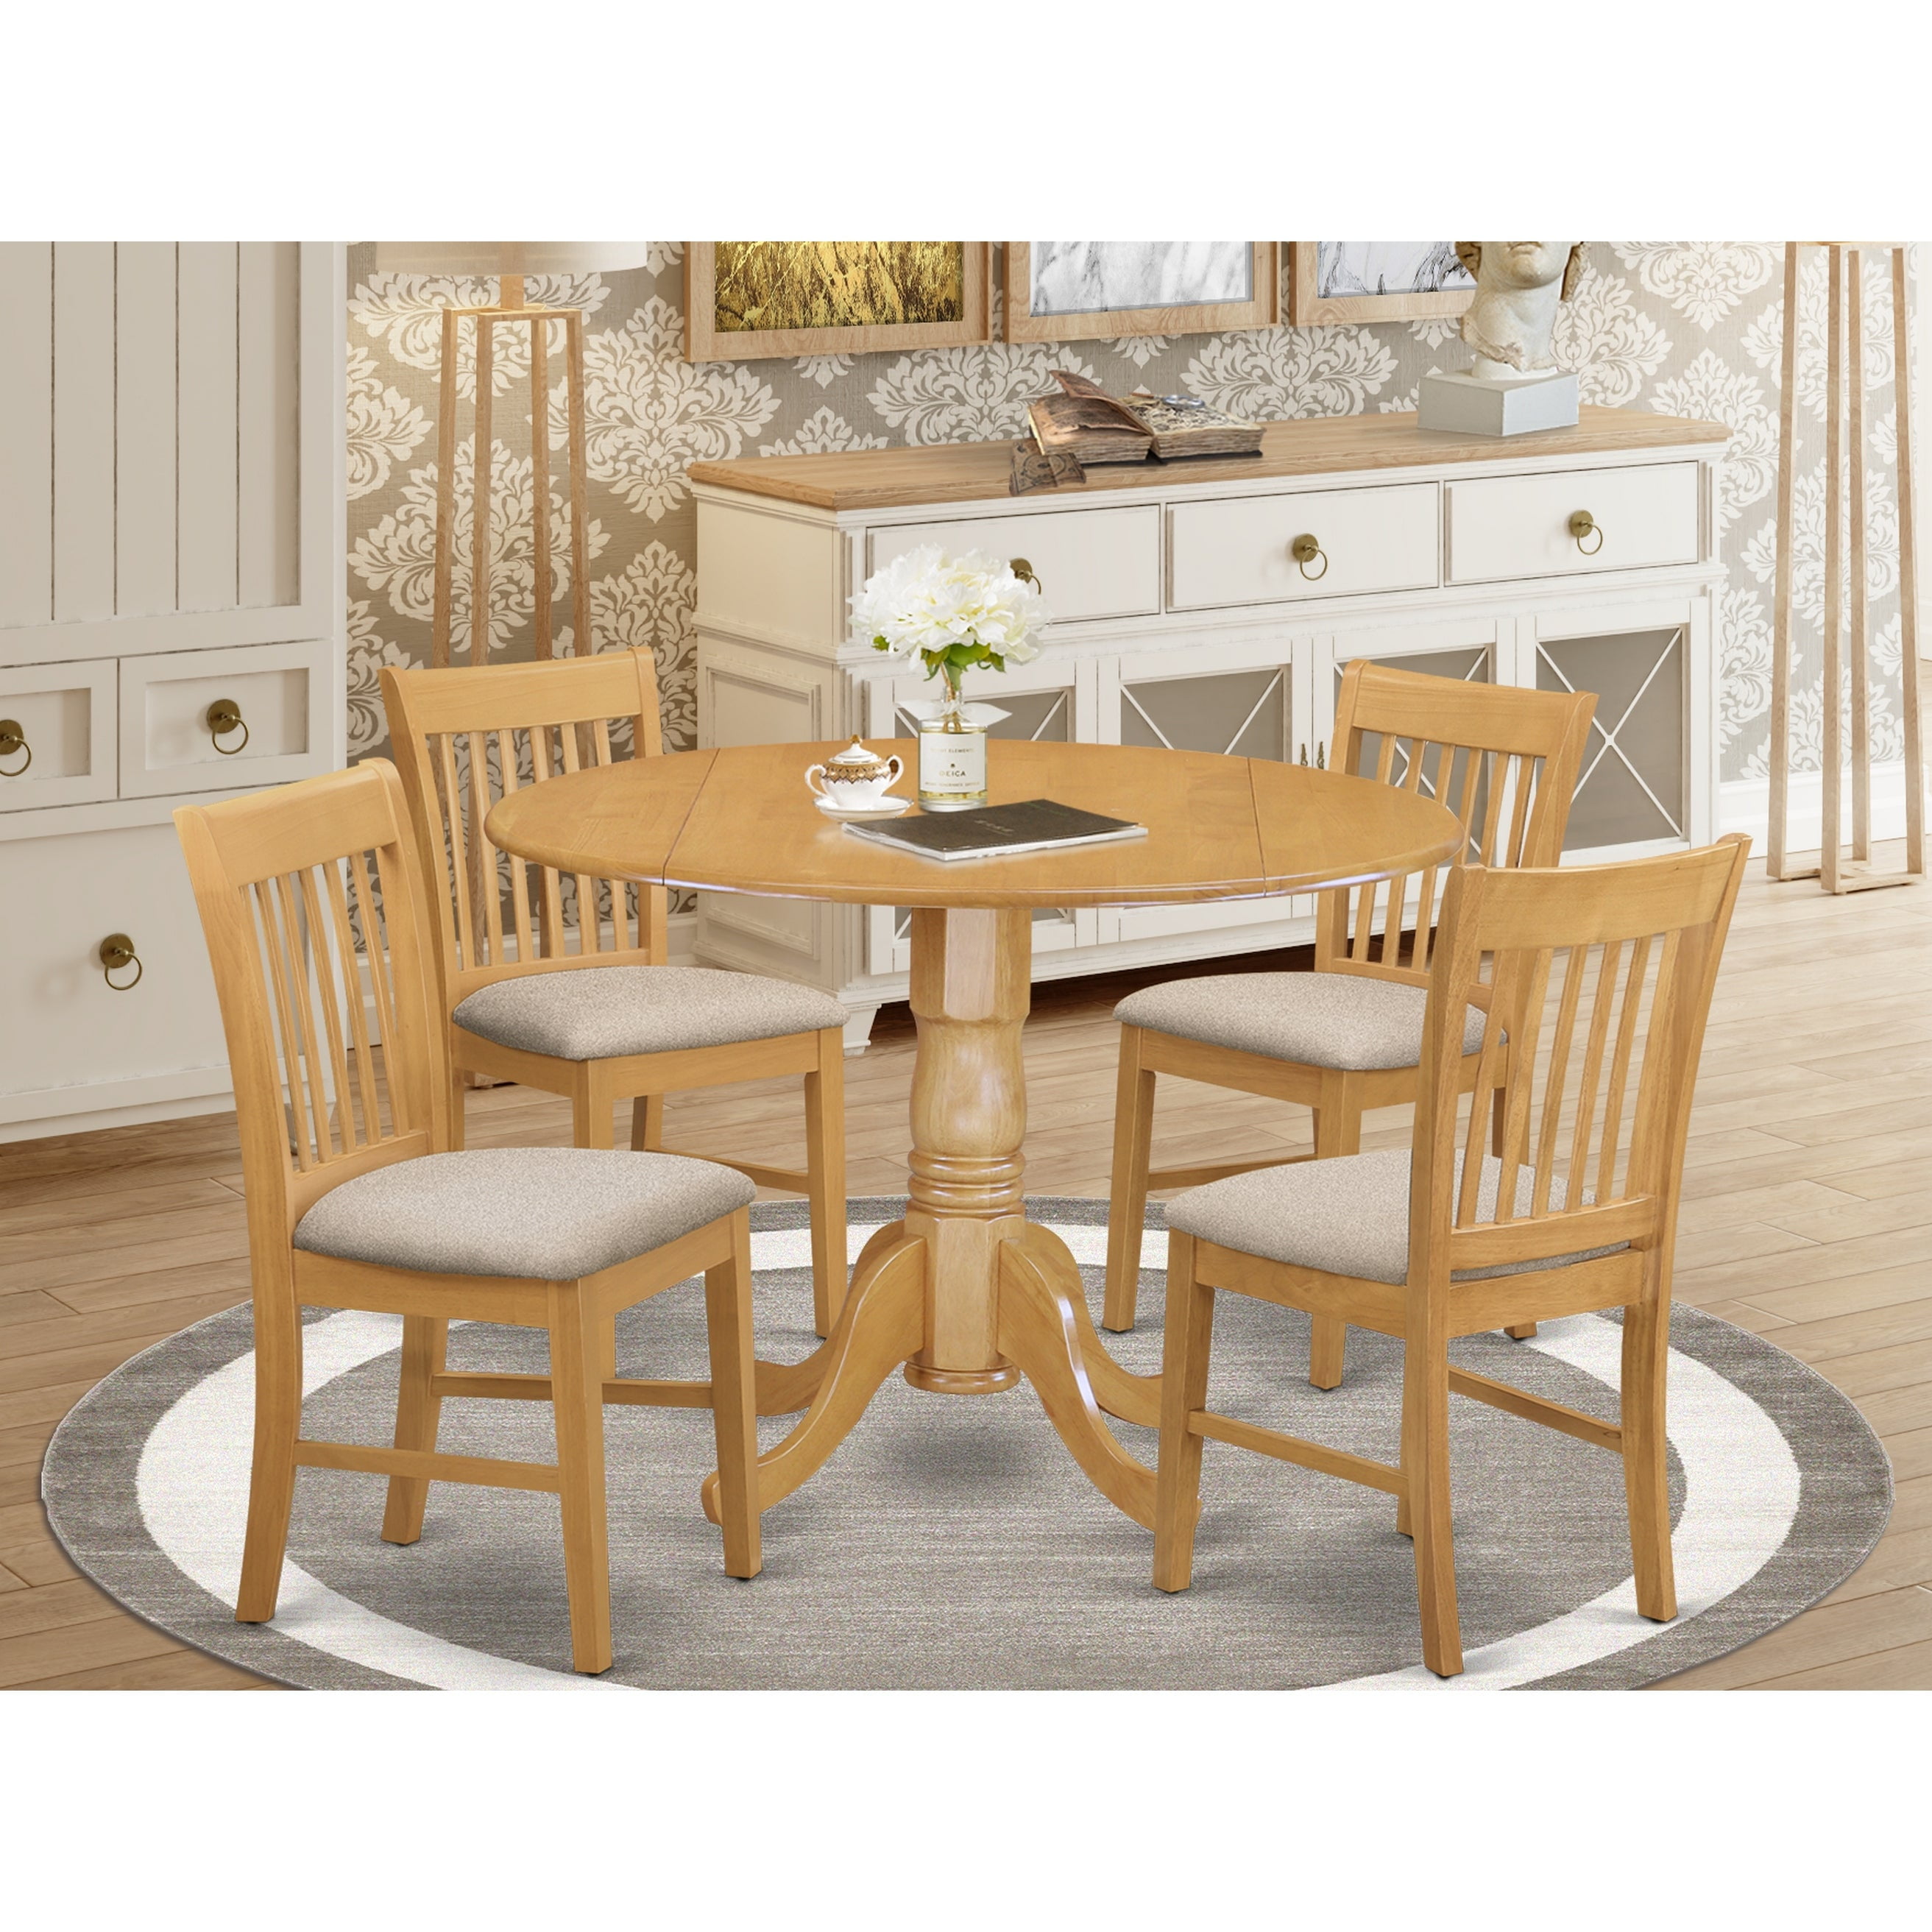  4 chair kitchen table